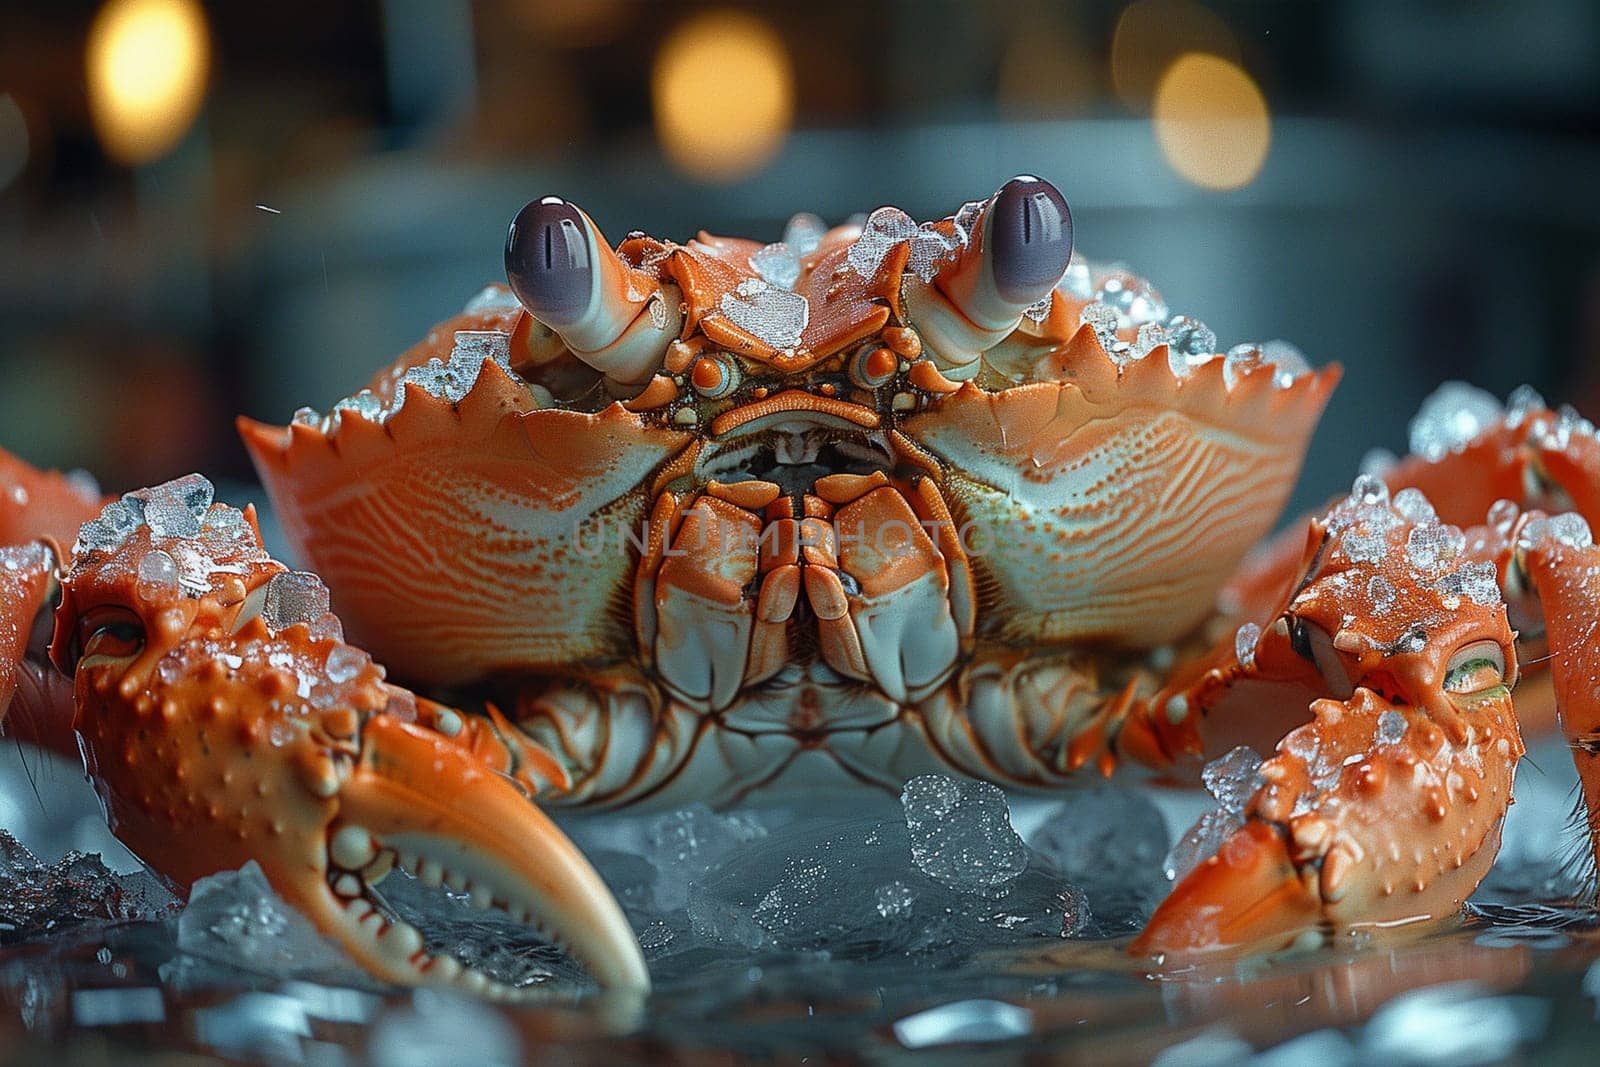 A detailed view of a crab crawling on a bed of ice, showcasing its intricate shell and sharp claws.